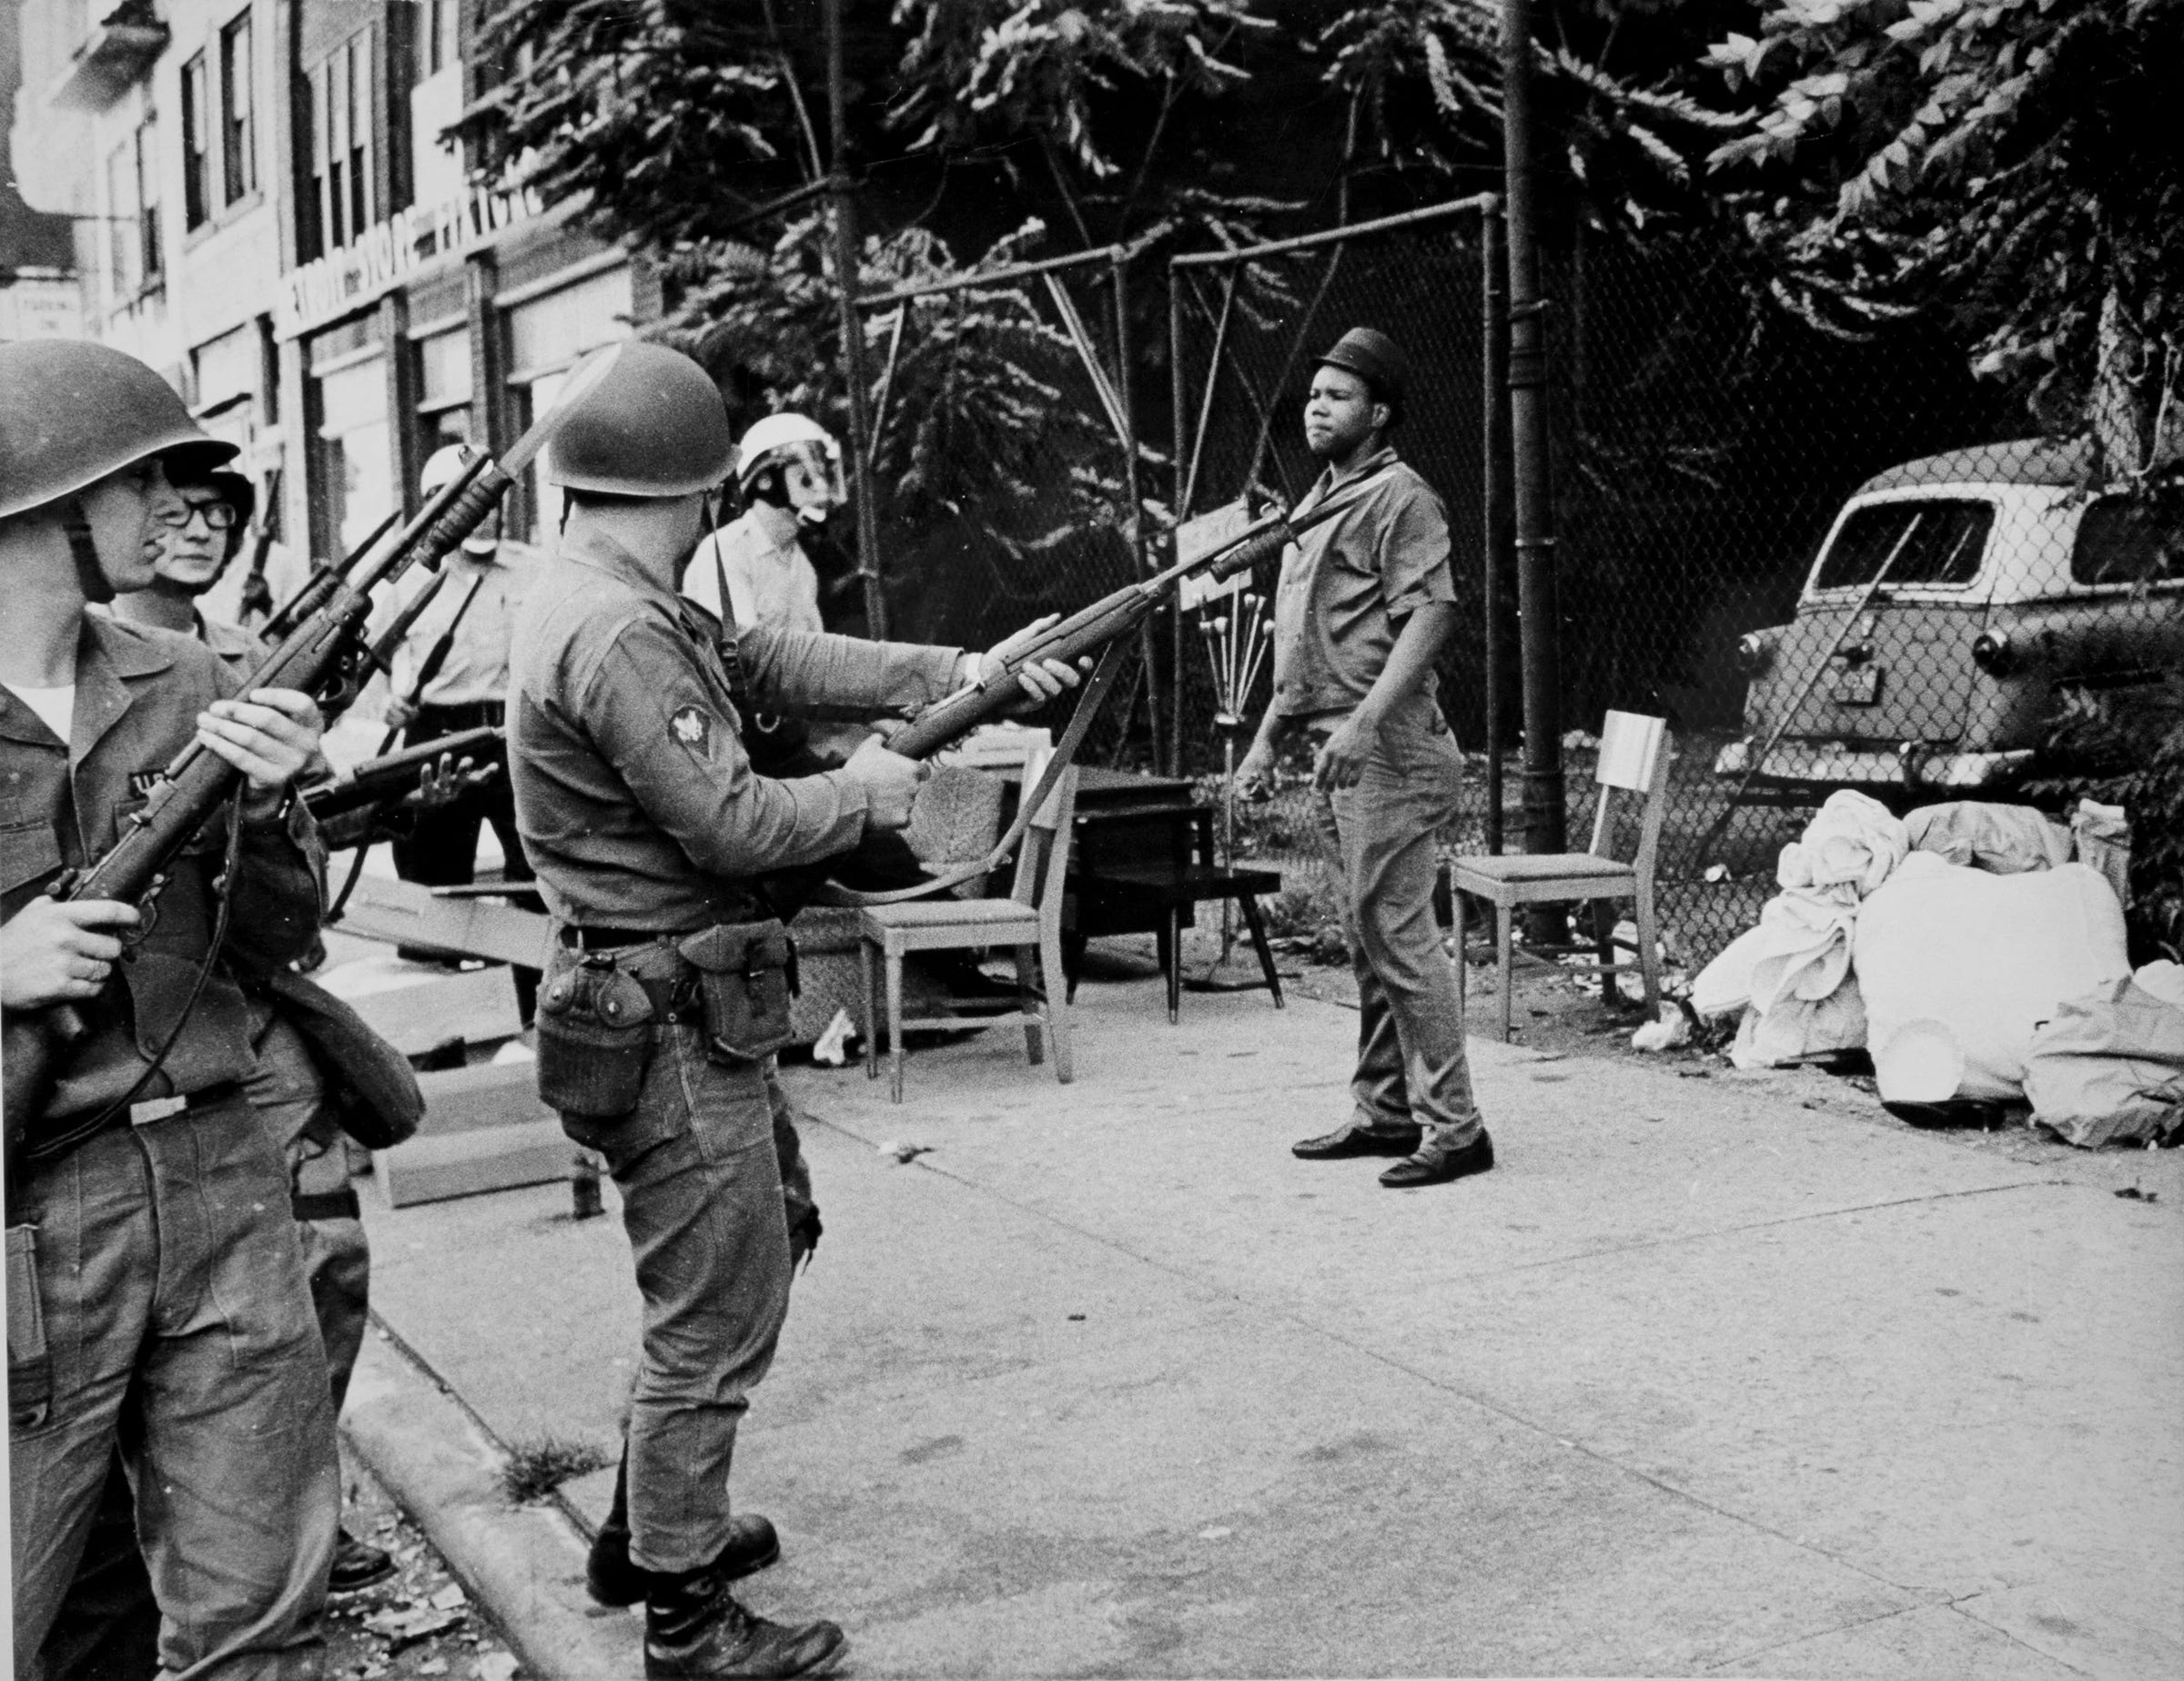 Former cop says 1967 riot killed Detroit: 'It'll never come back'